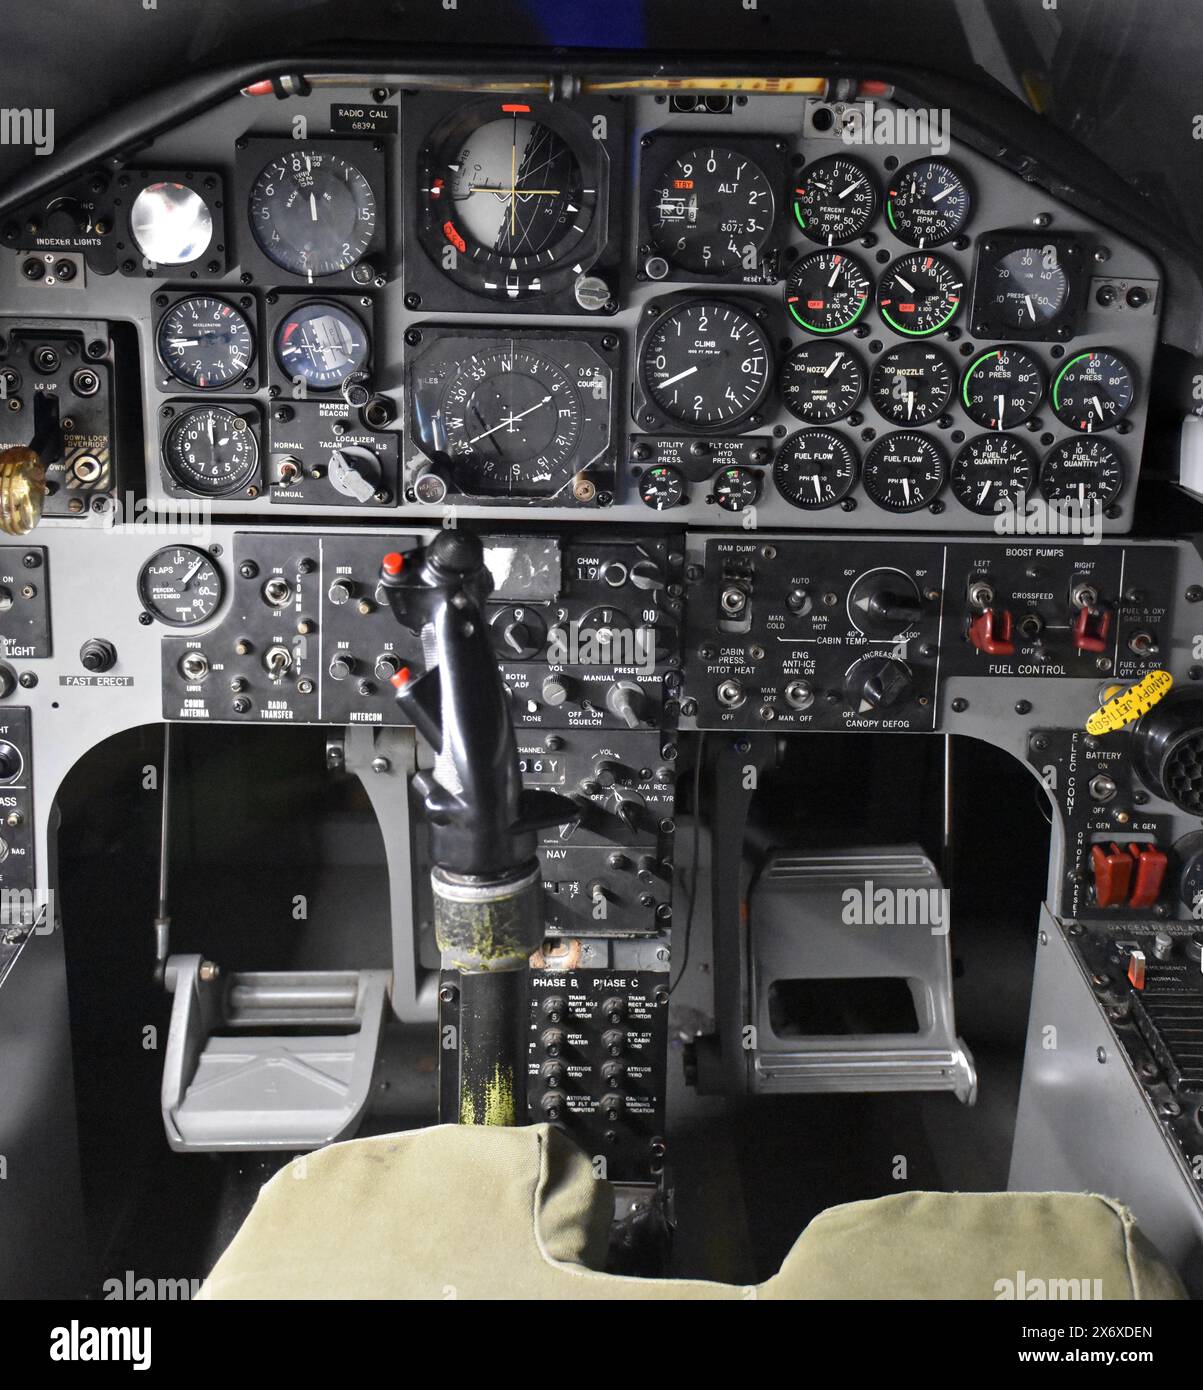 The cockpit of a U.S. Air Force T-38 Talon. The Talon is a two-seat, twin-engine supersonic jet trainer. Stock Photo